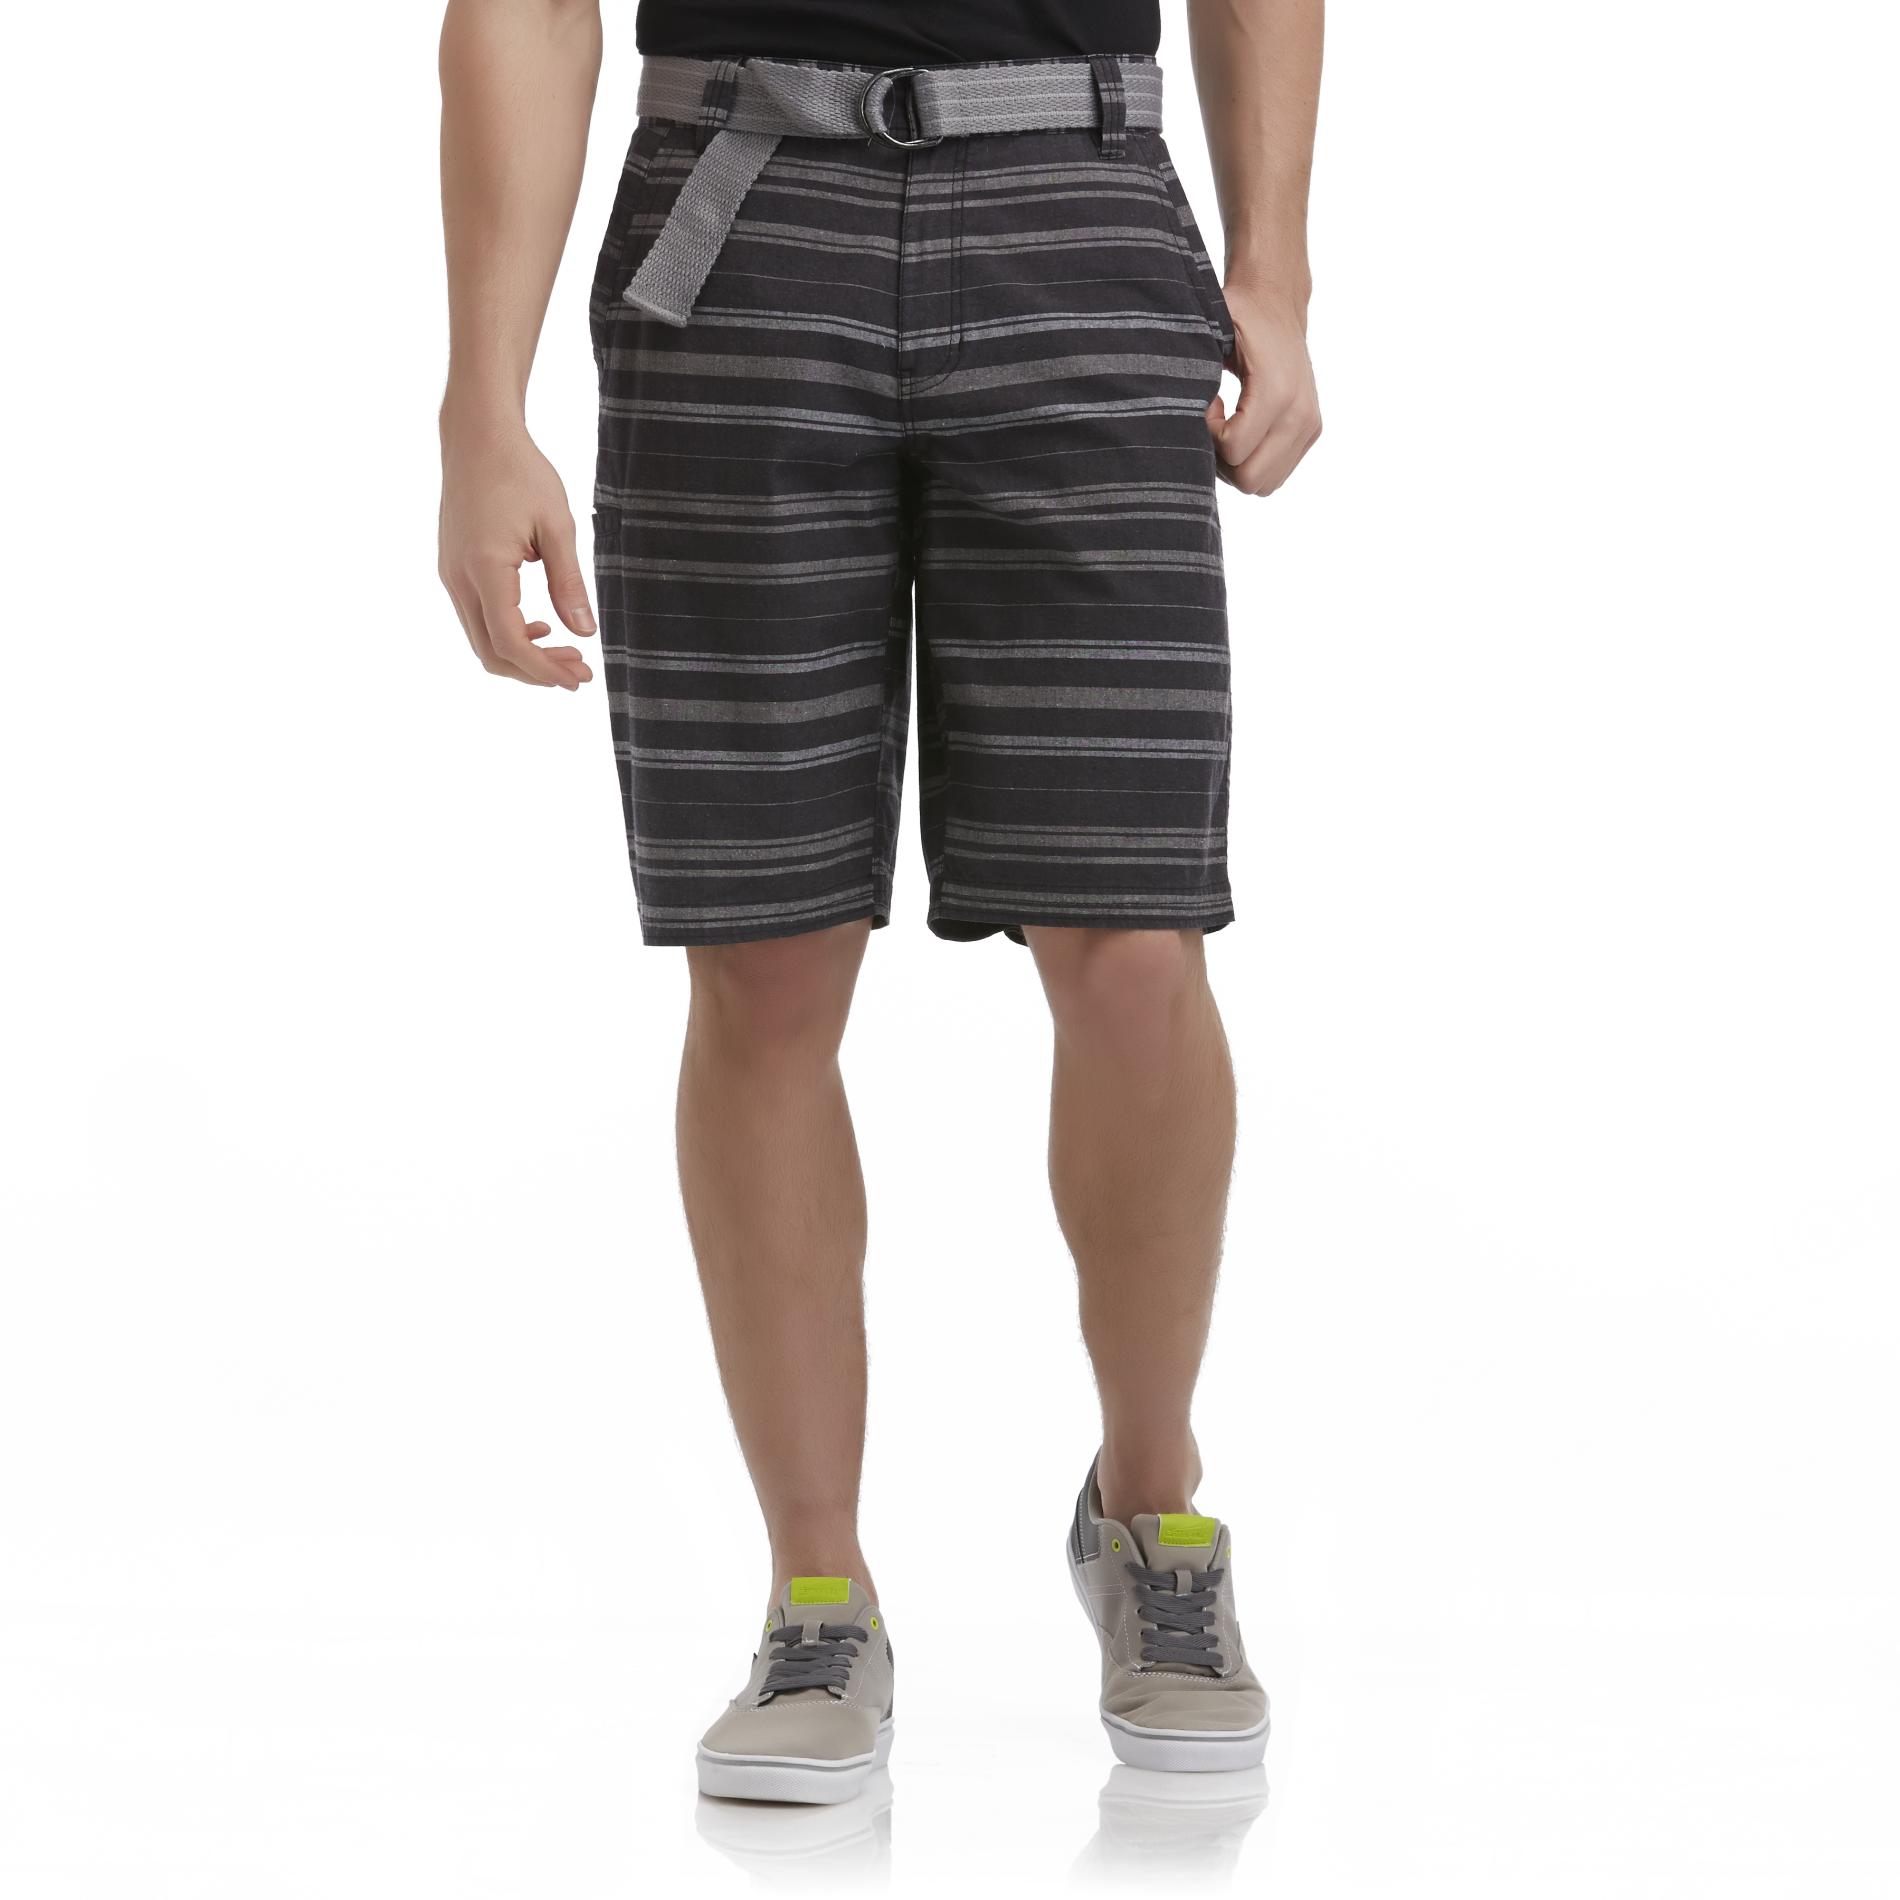 Route 66 Men's Belted Shorts - Striped